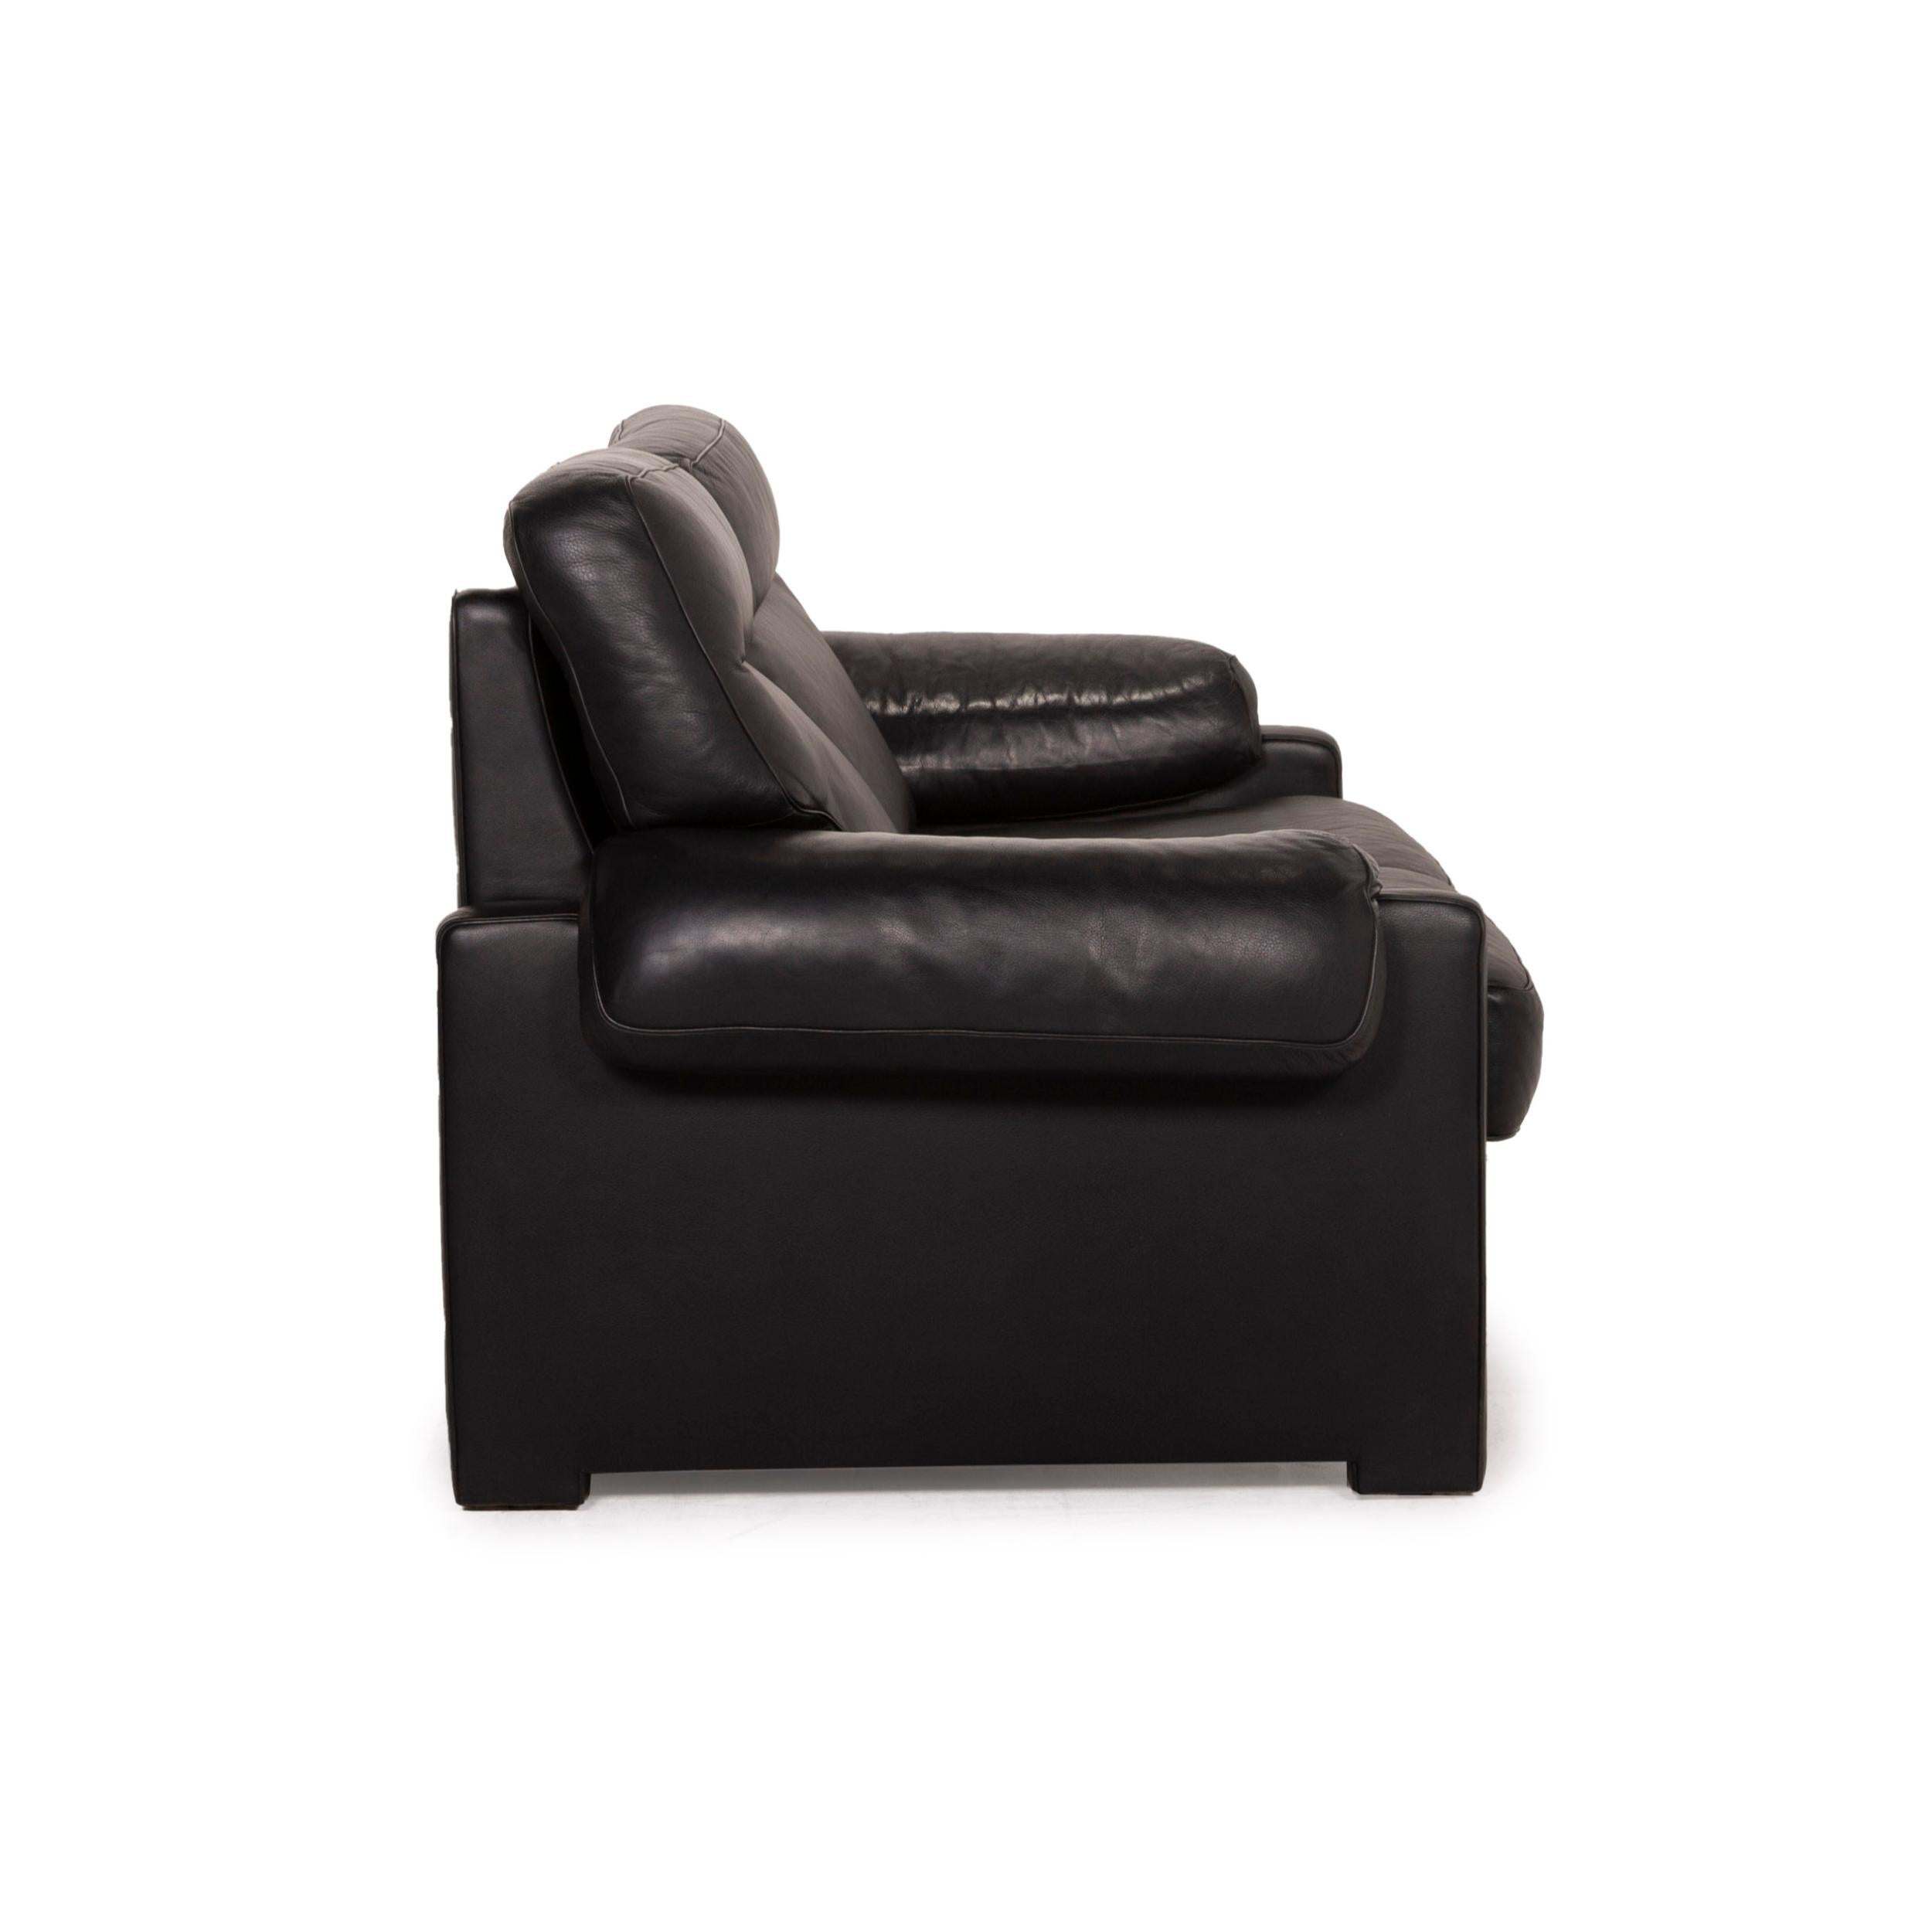 De Sede ds 70 Leather Sofa Black Two-Seater For Sale 2